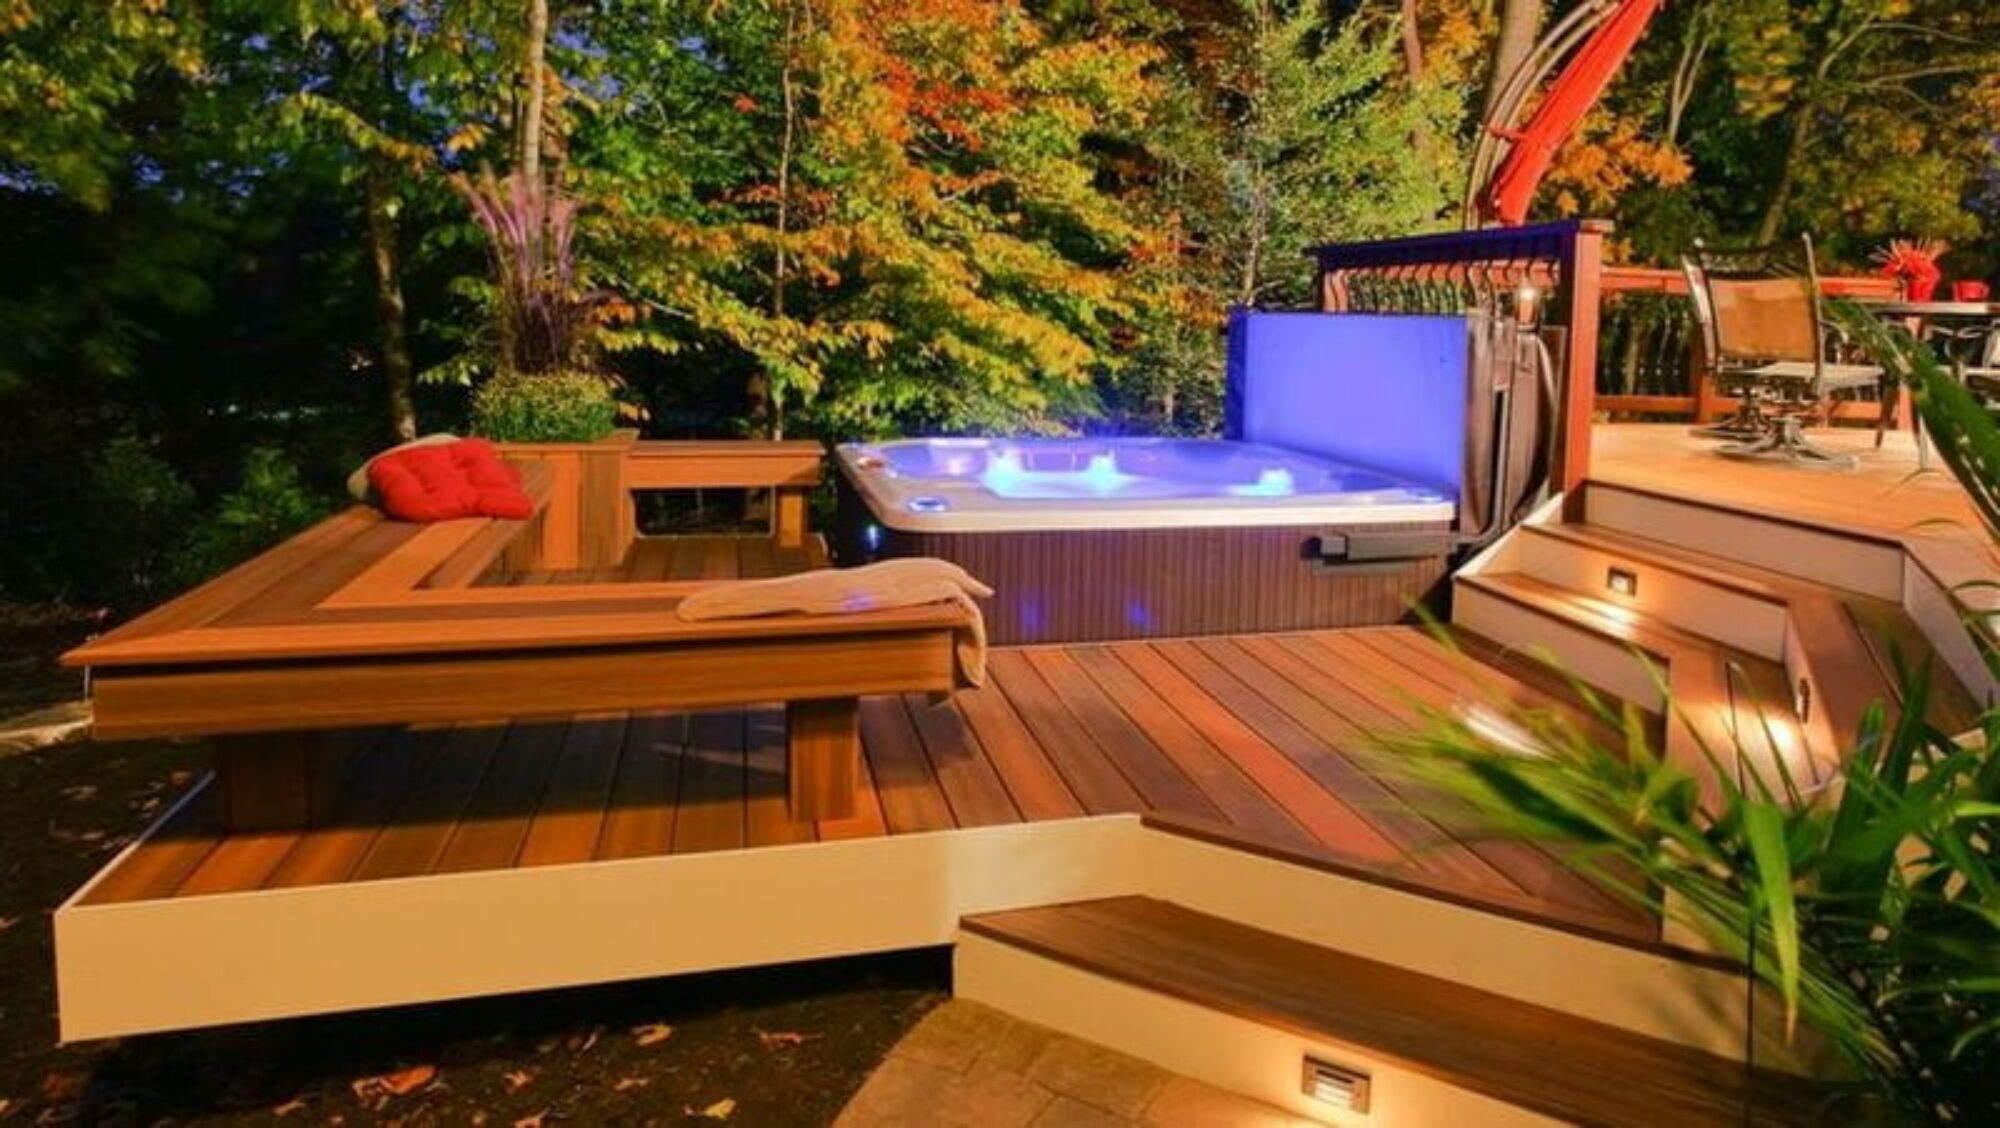 What Deck Materials Should You Use Around Your Outdoor Spa